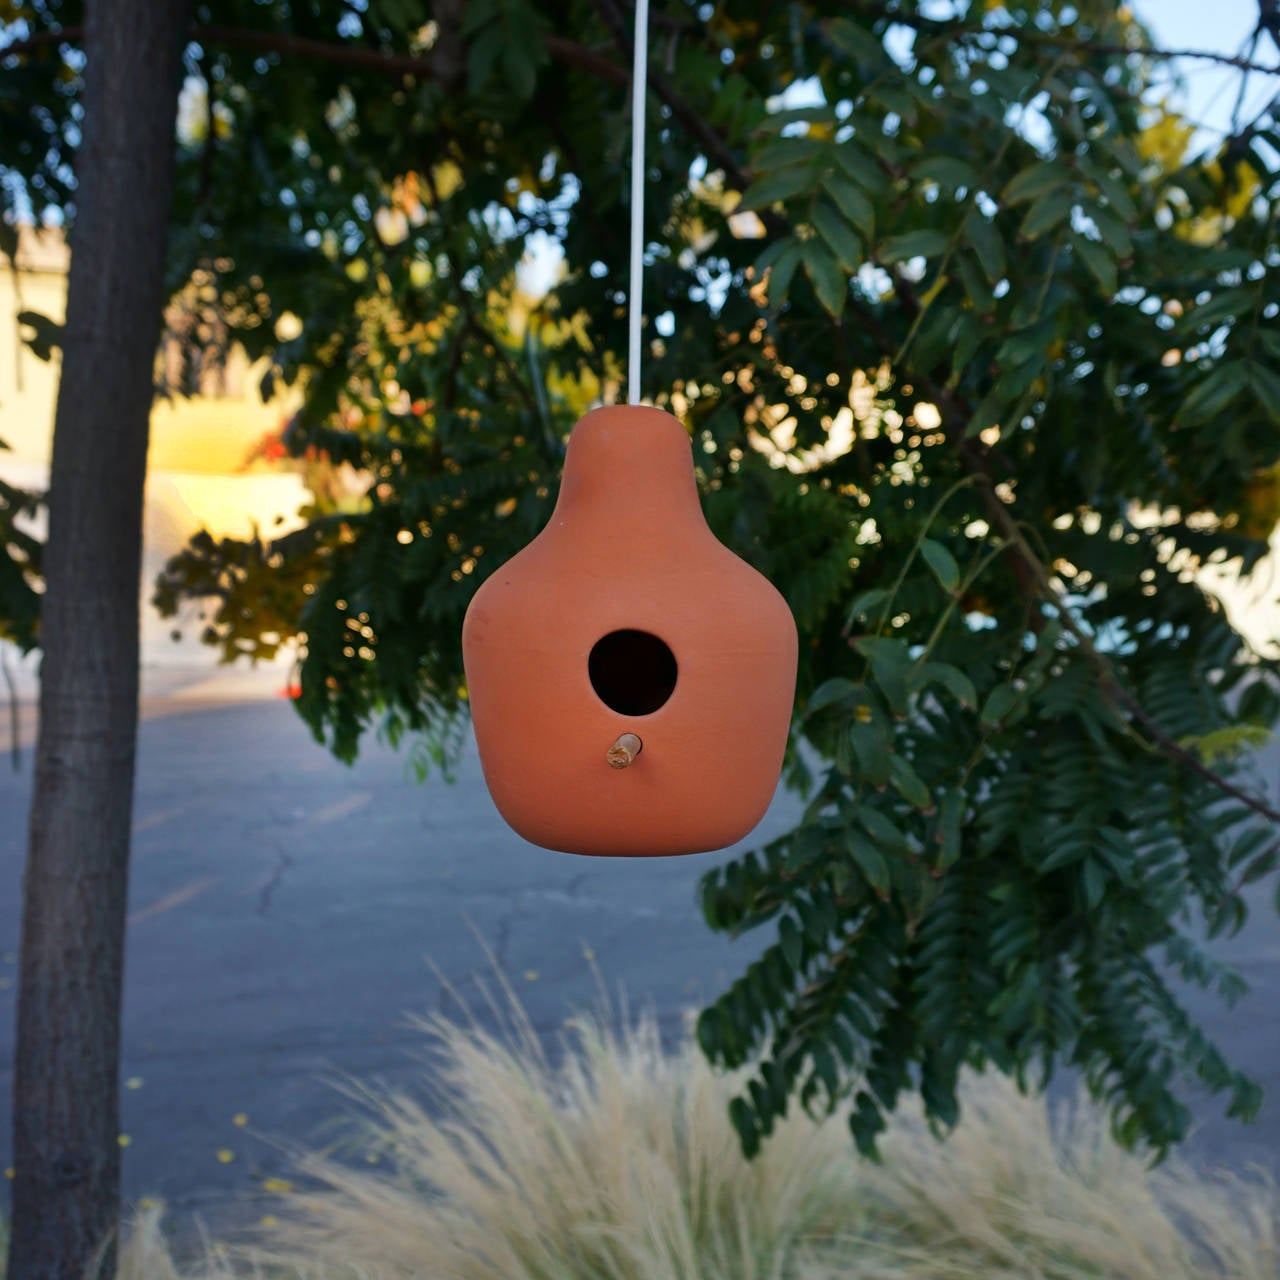 Unique 1952 prototype birdhouse in terracotta, by Malcolm Leland. This model was never put into production. A vastly different design was eventually put into design by Architectural Pottery. Acquired from Malcolm Leland.